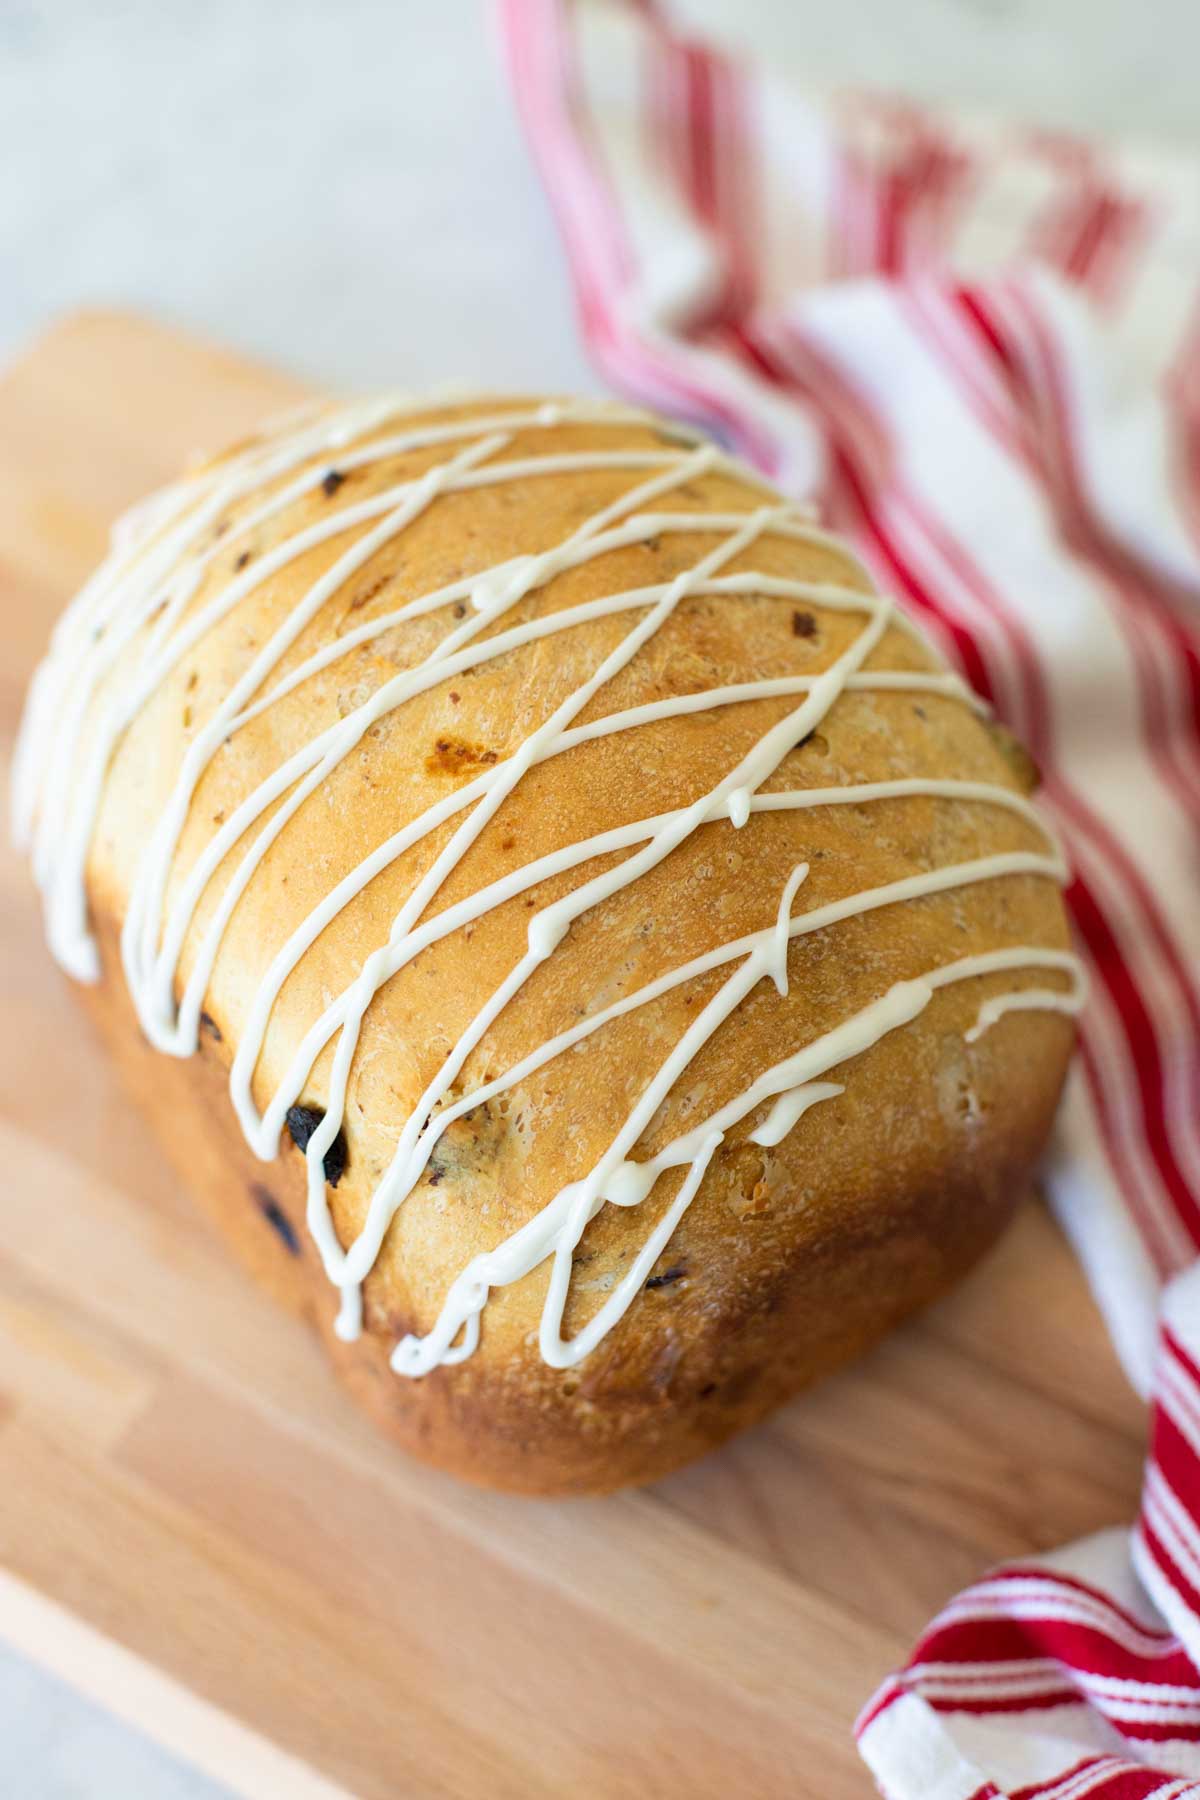 A finished loaf of Bavarian Christmas bread from the bread machine. The loaf has a drizzle of white glaze in a criss cross pattern over the top and a red and white striped towel sits next to it.